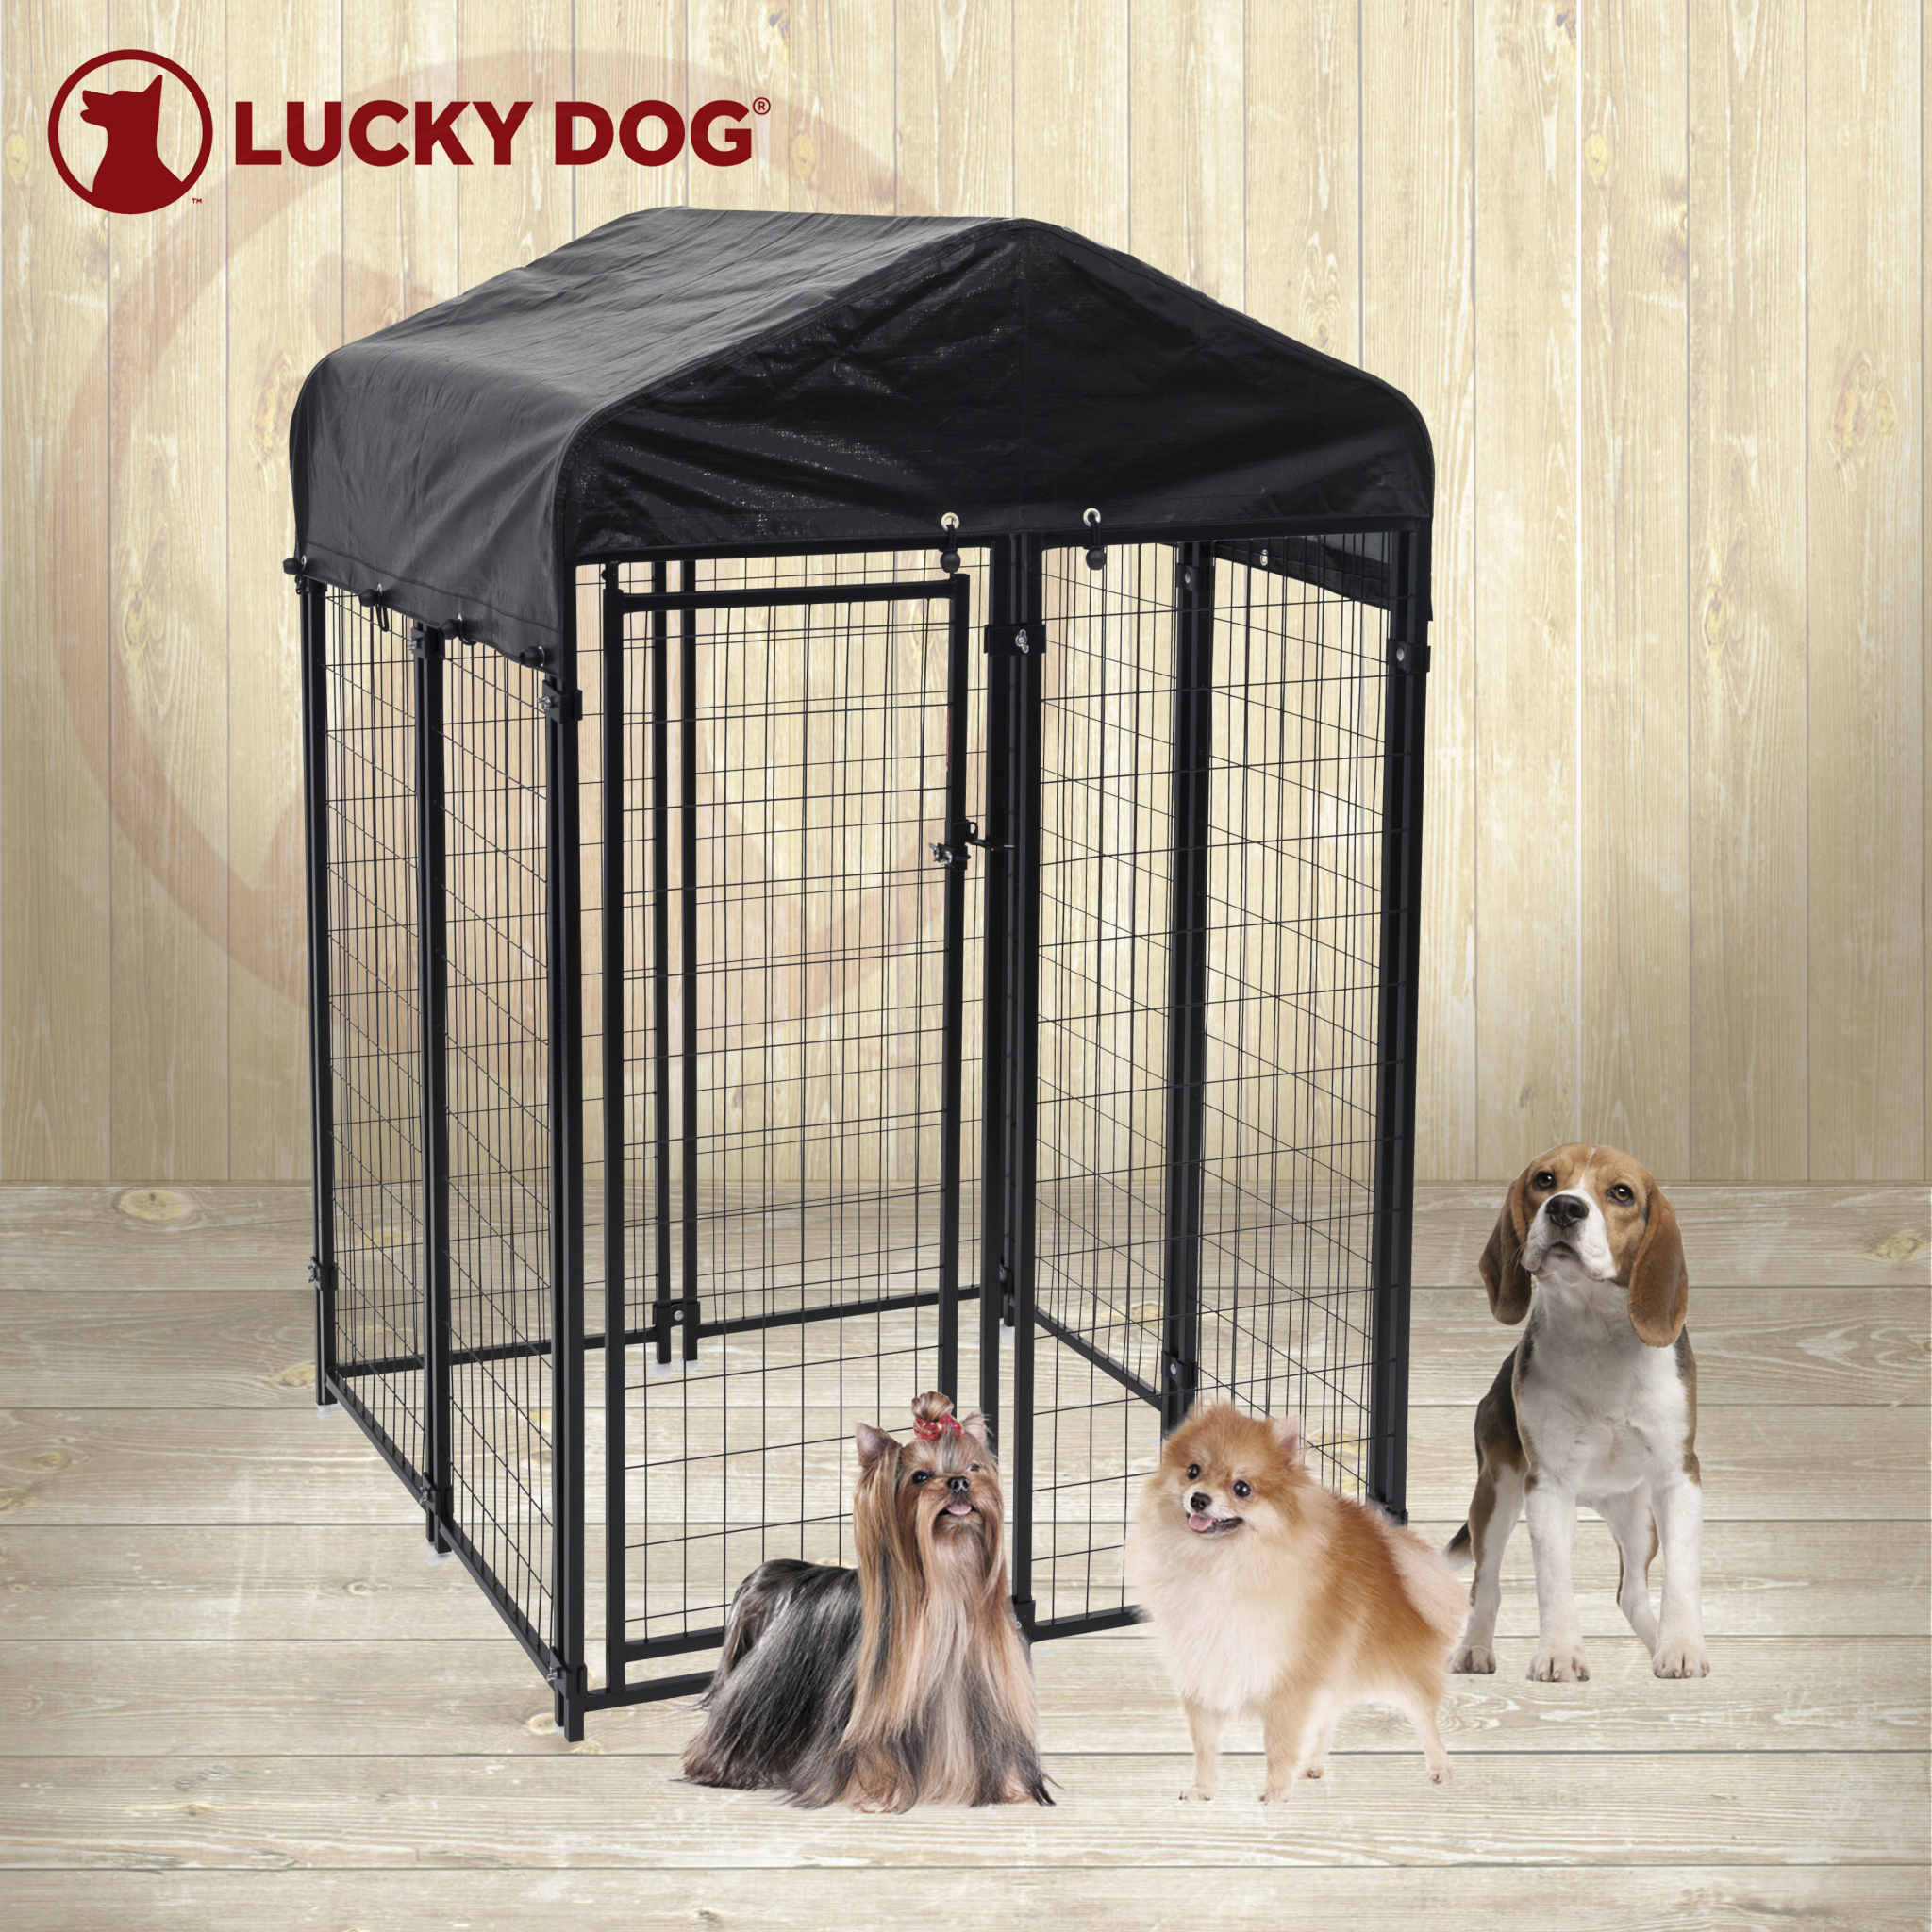 Lucky Dog Uptown Welded Wire Dog Kennel w/ Cover, 6'H x 4'W x 4'L - image 5 of 5